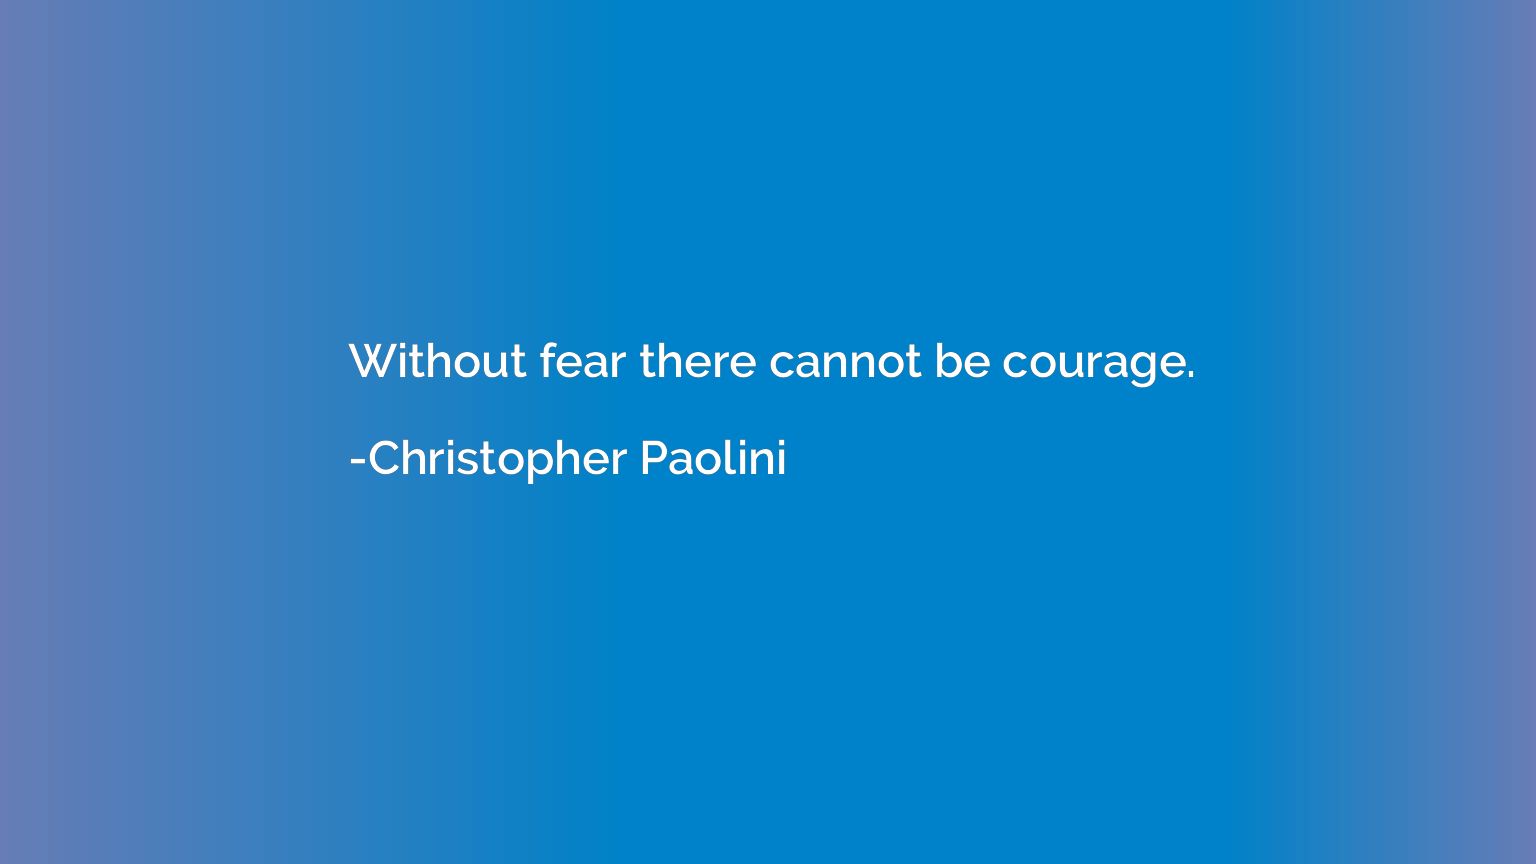 Without fear there cannot be courage.